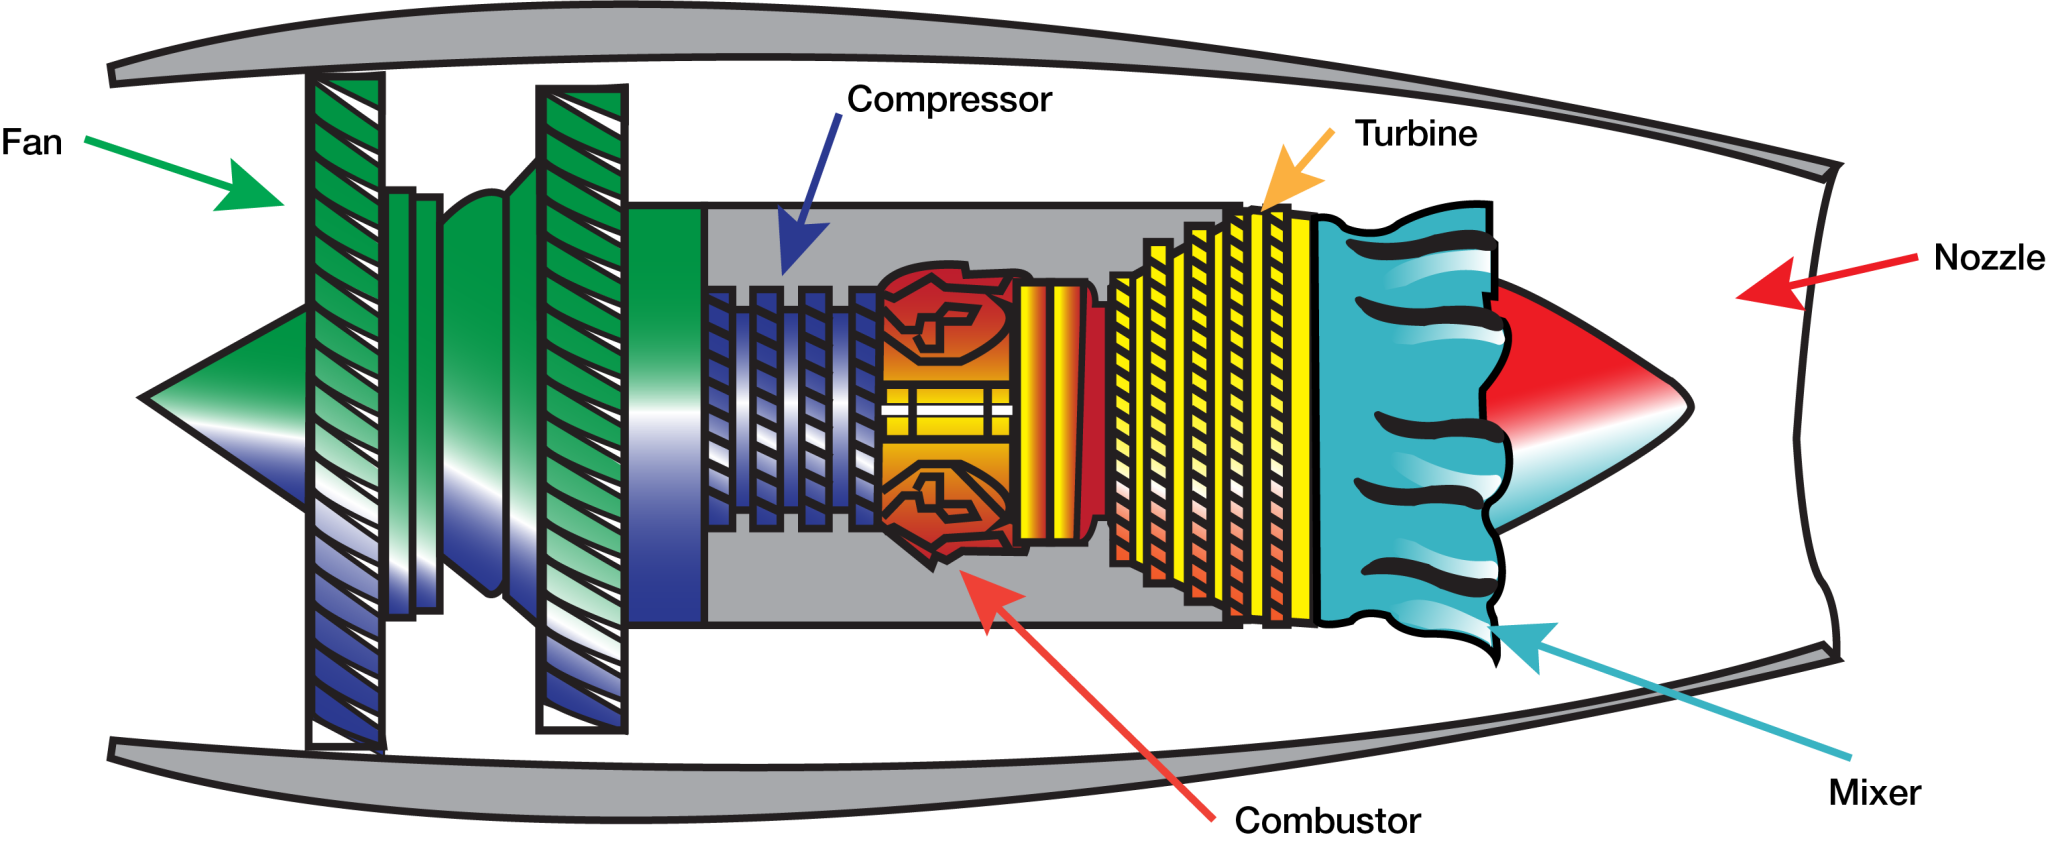 A graphic design rendition of the parts of a turbine engine.